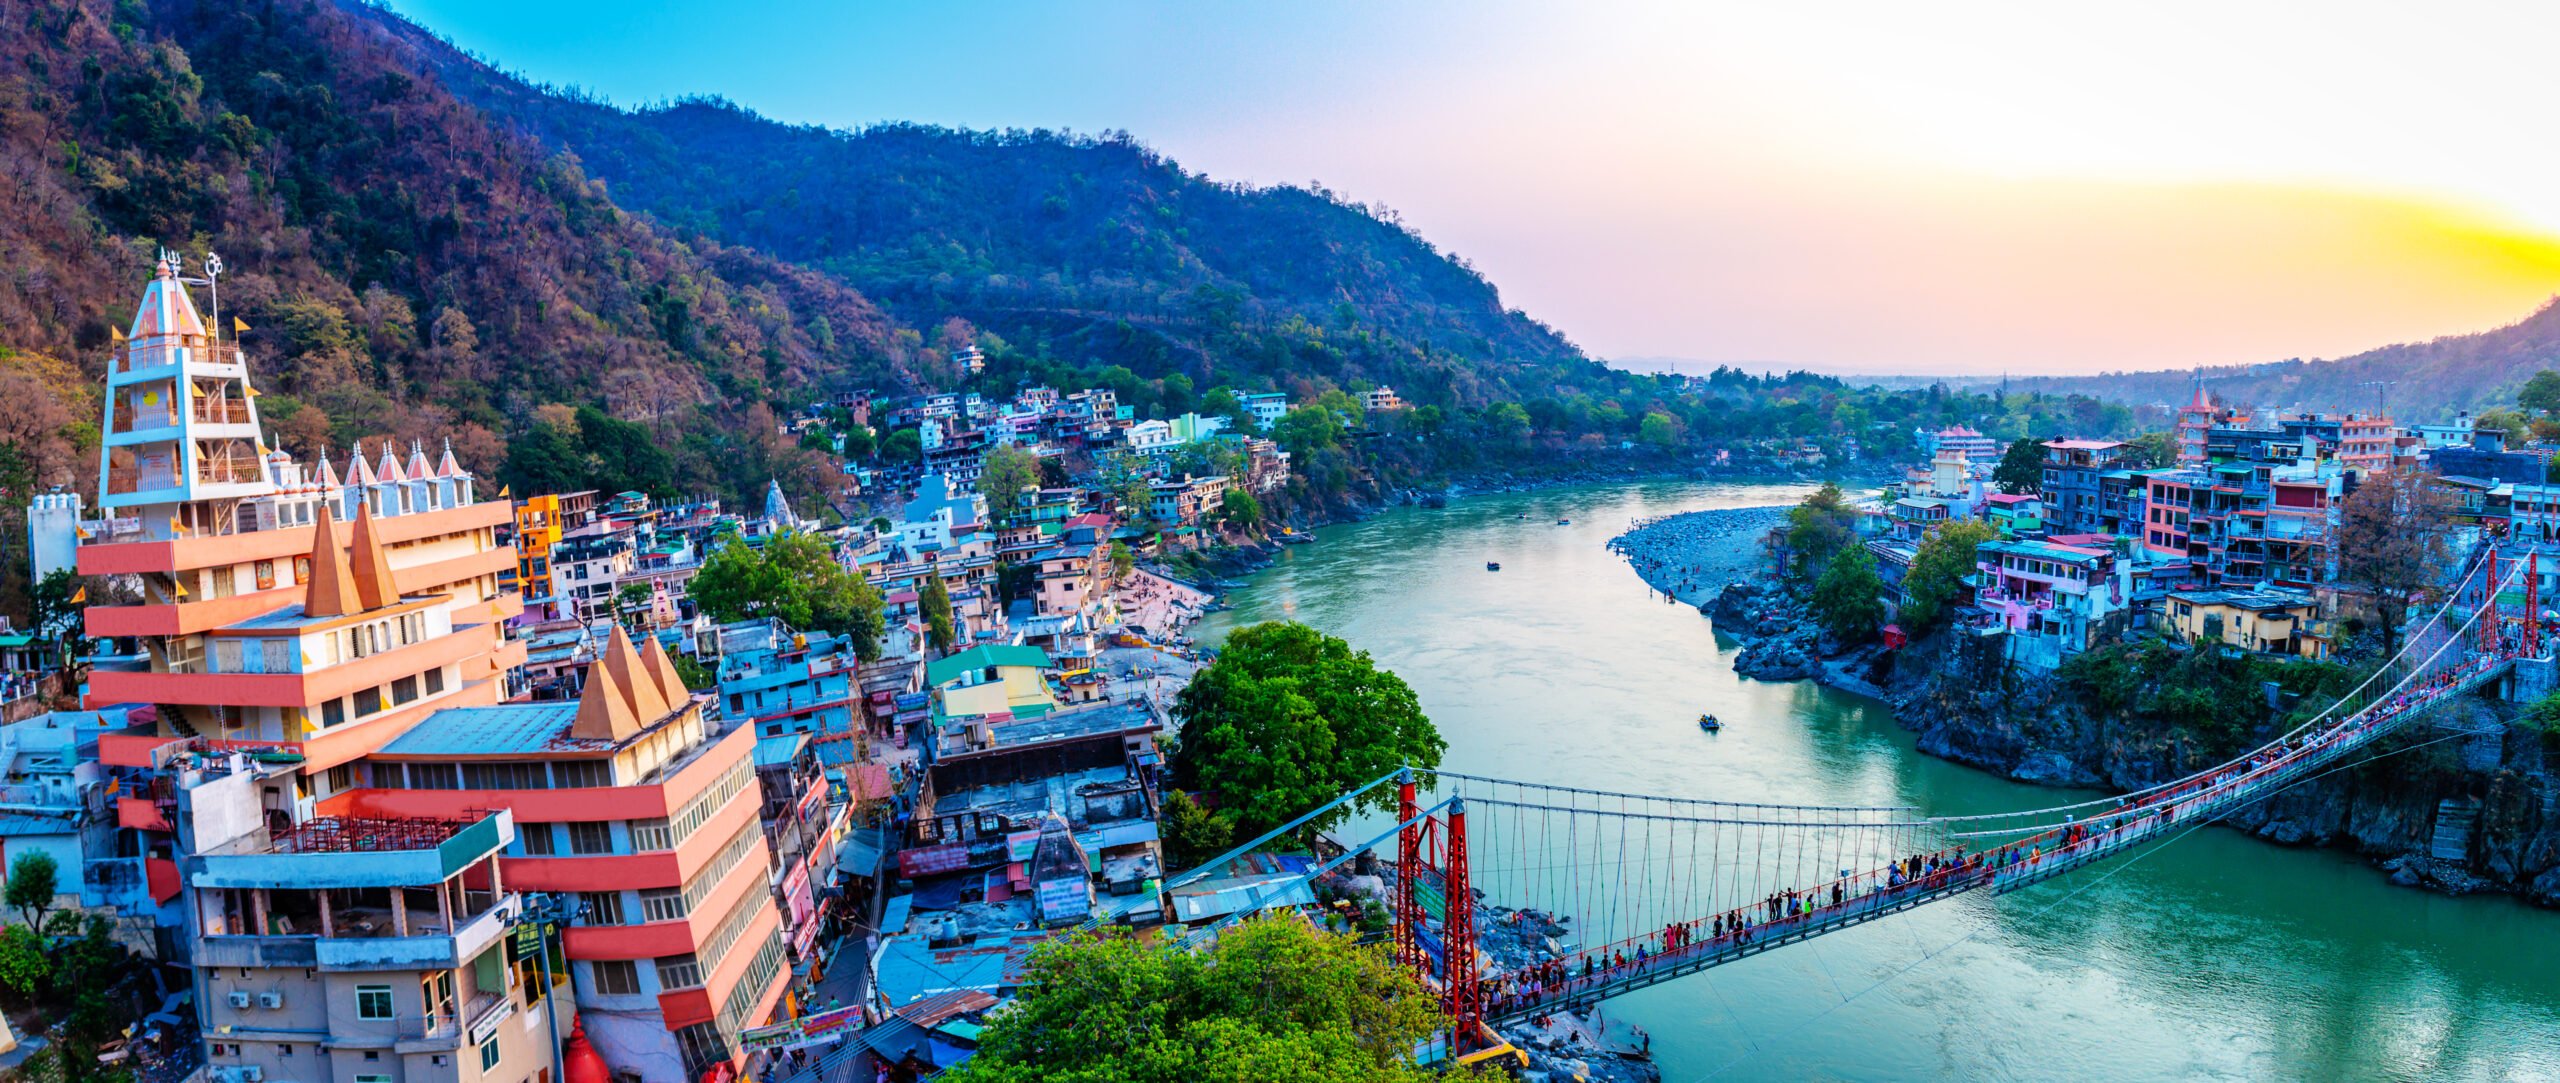 Discover Rishikesh In Our 2 Day Yoga And Spirituality Tour In Rishikesh